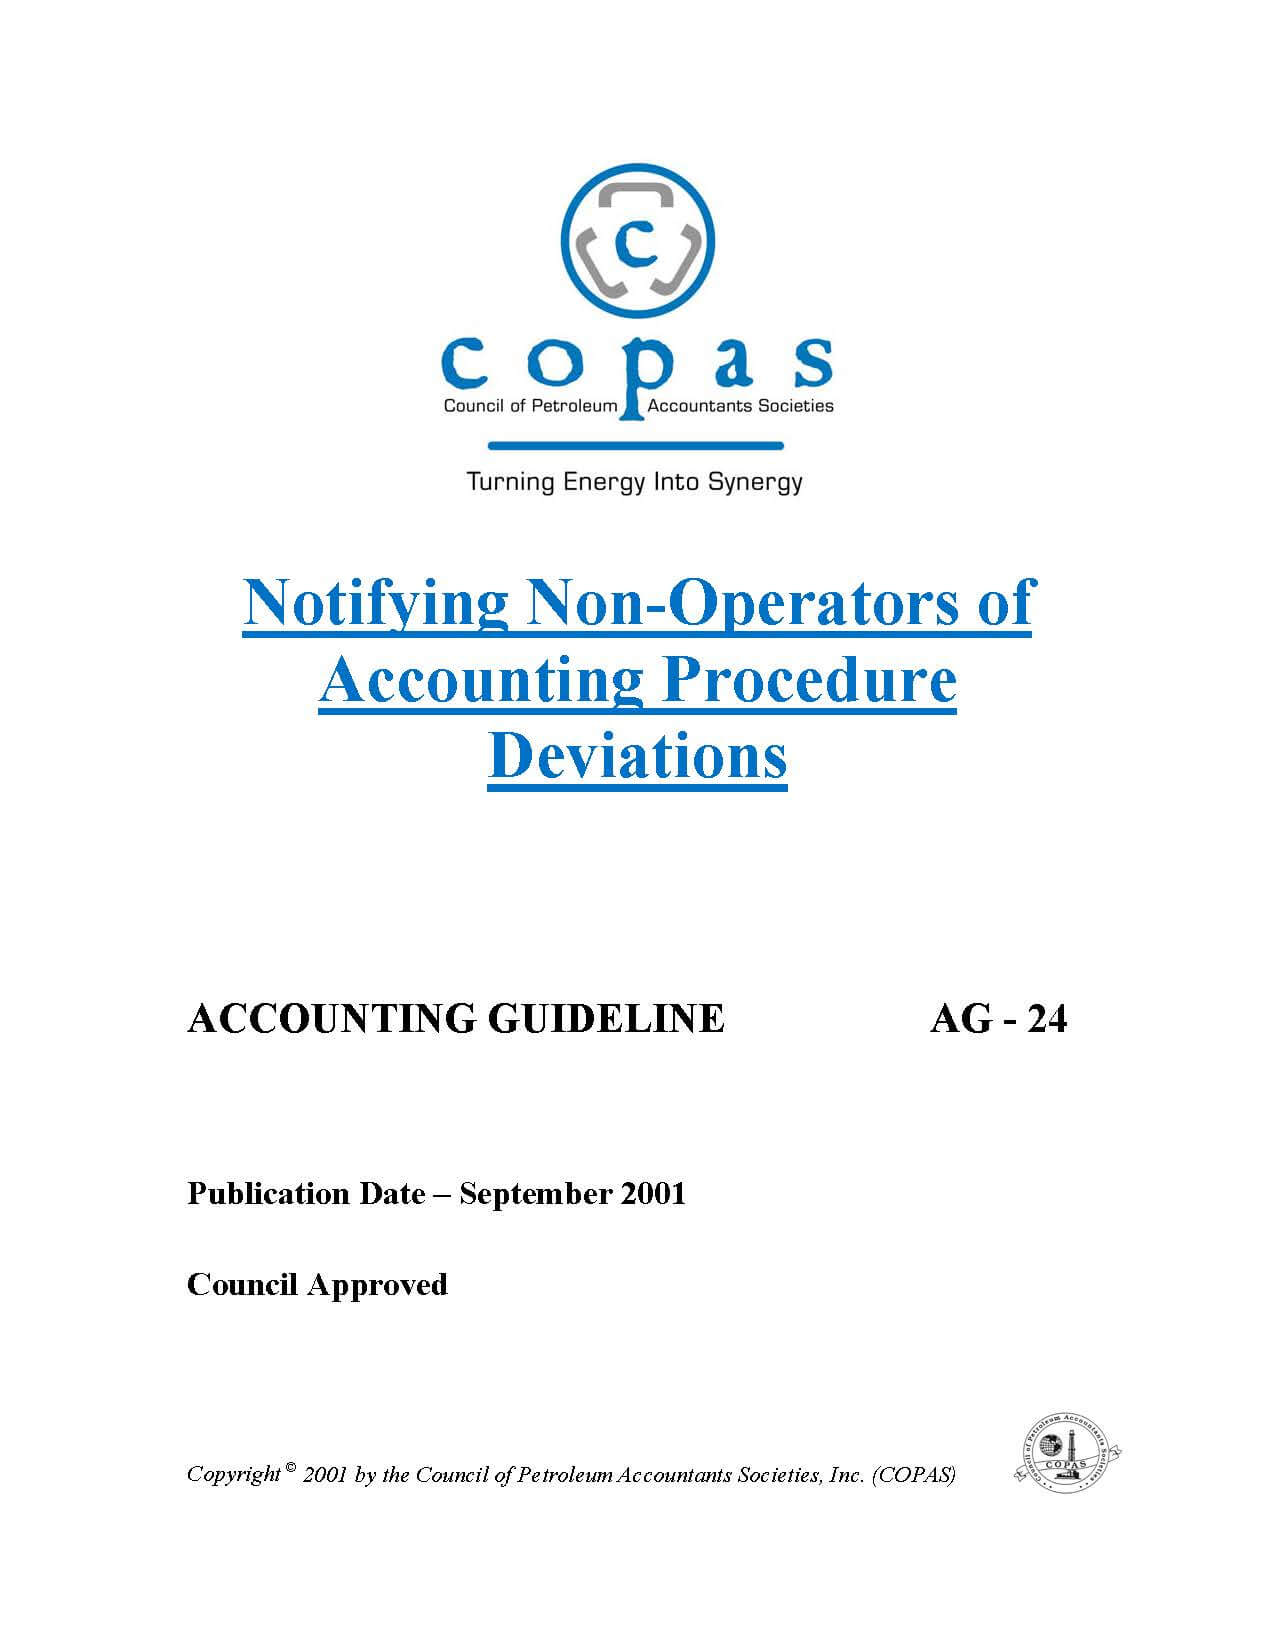 AG-24 Notifying Non Operators of Accounting Procedure Deviations